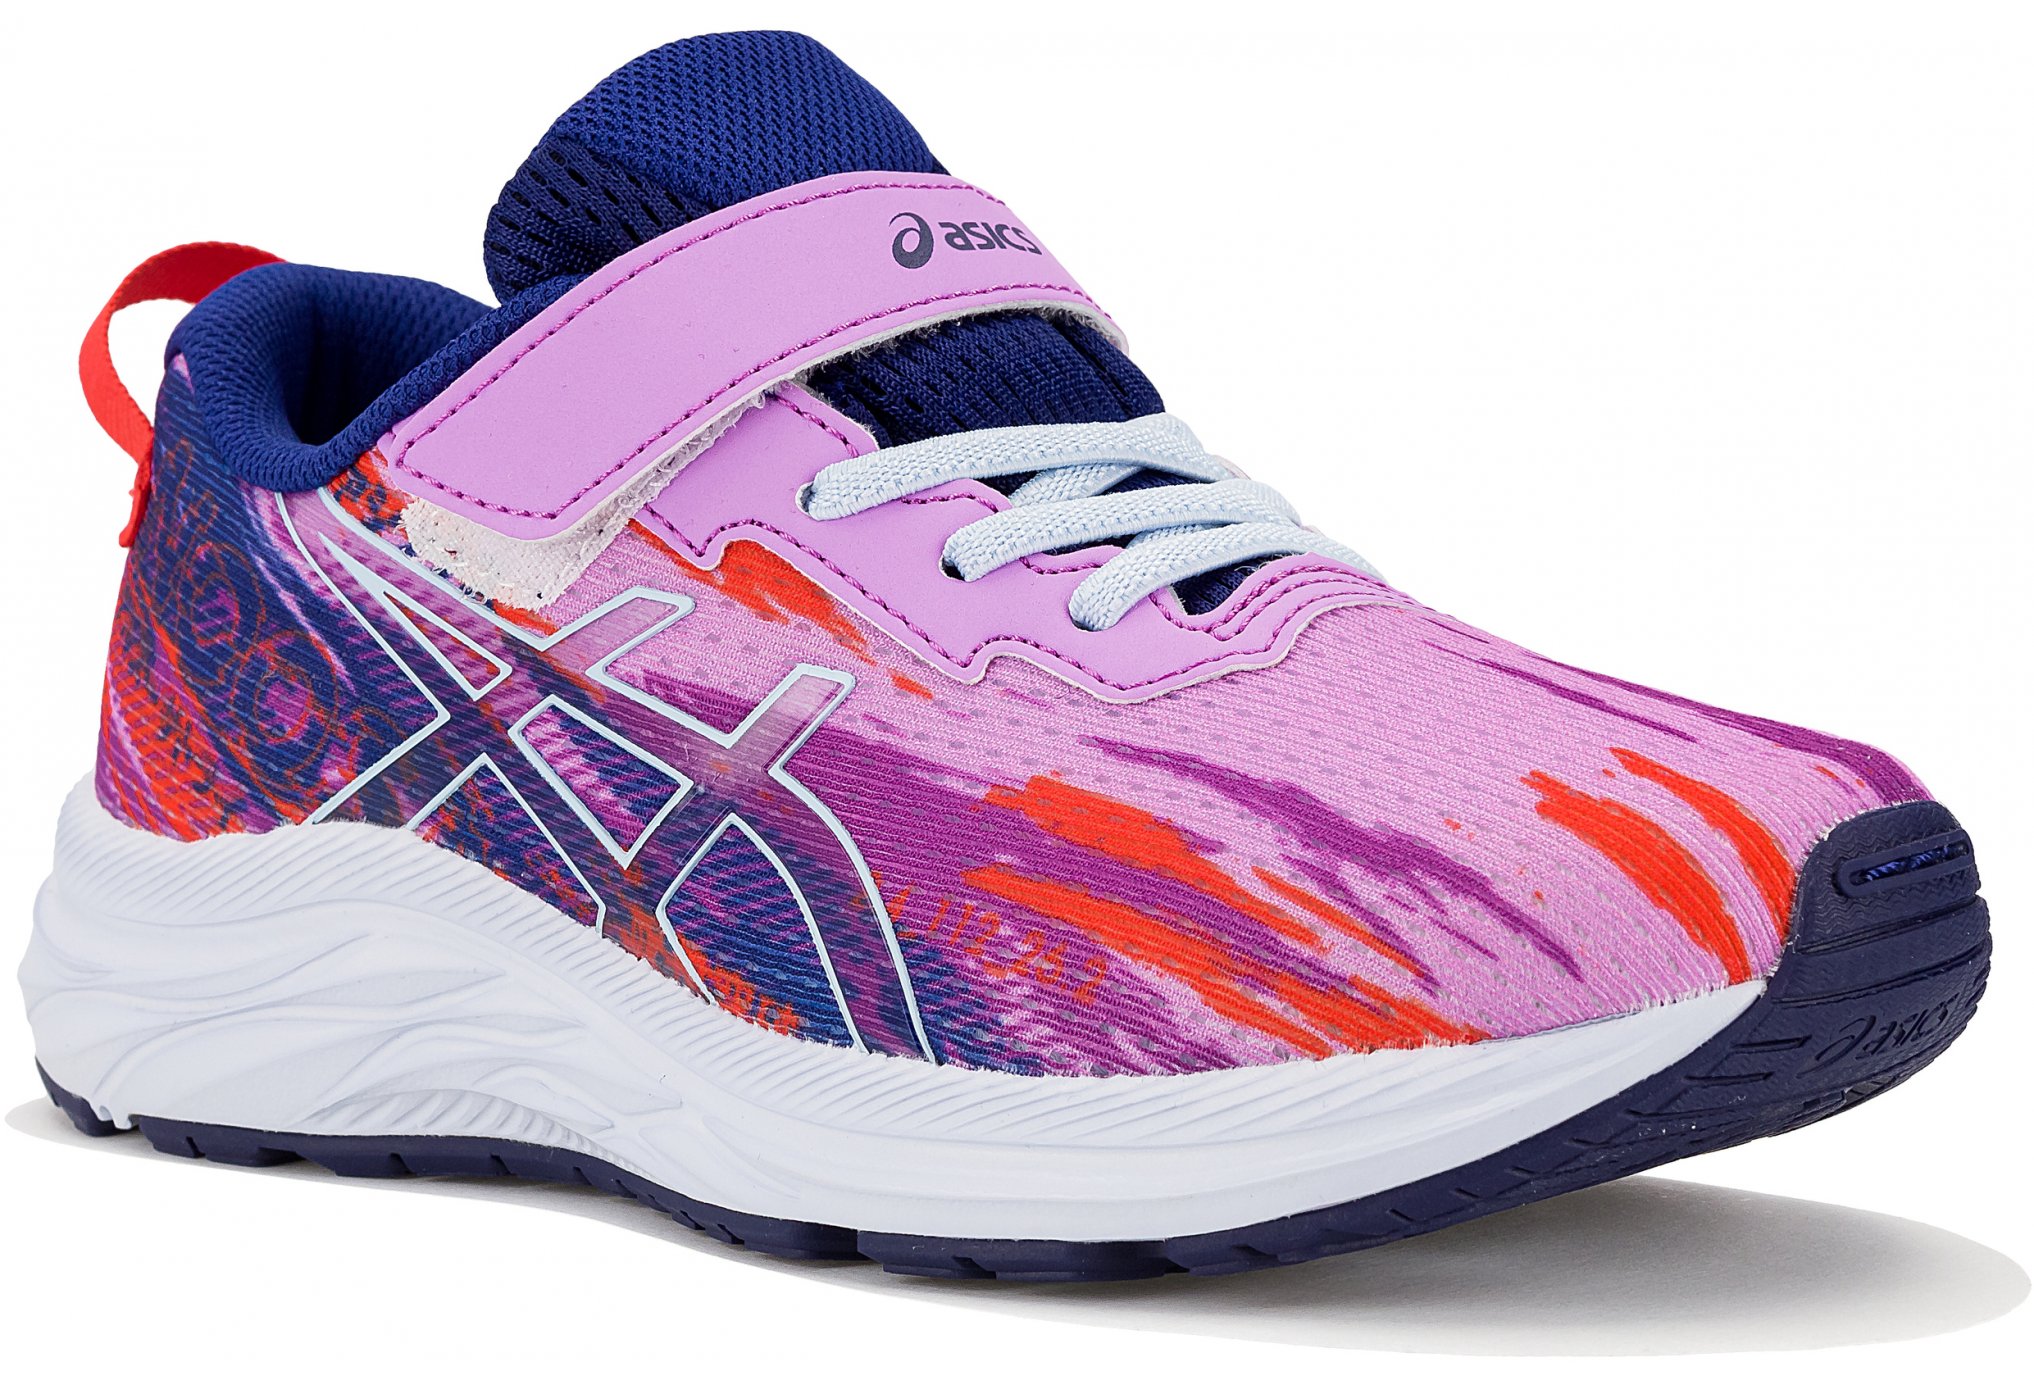 Asics Pre Noosa Tri 13 PS Fille Chaussures running femme